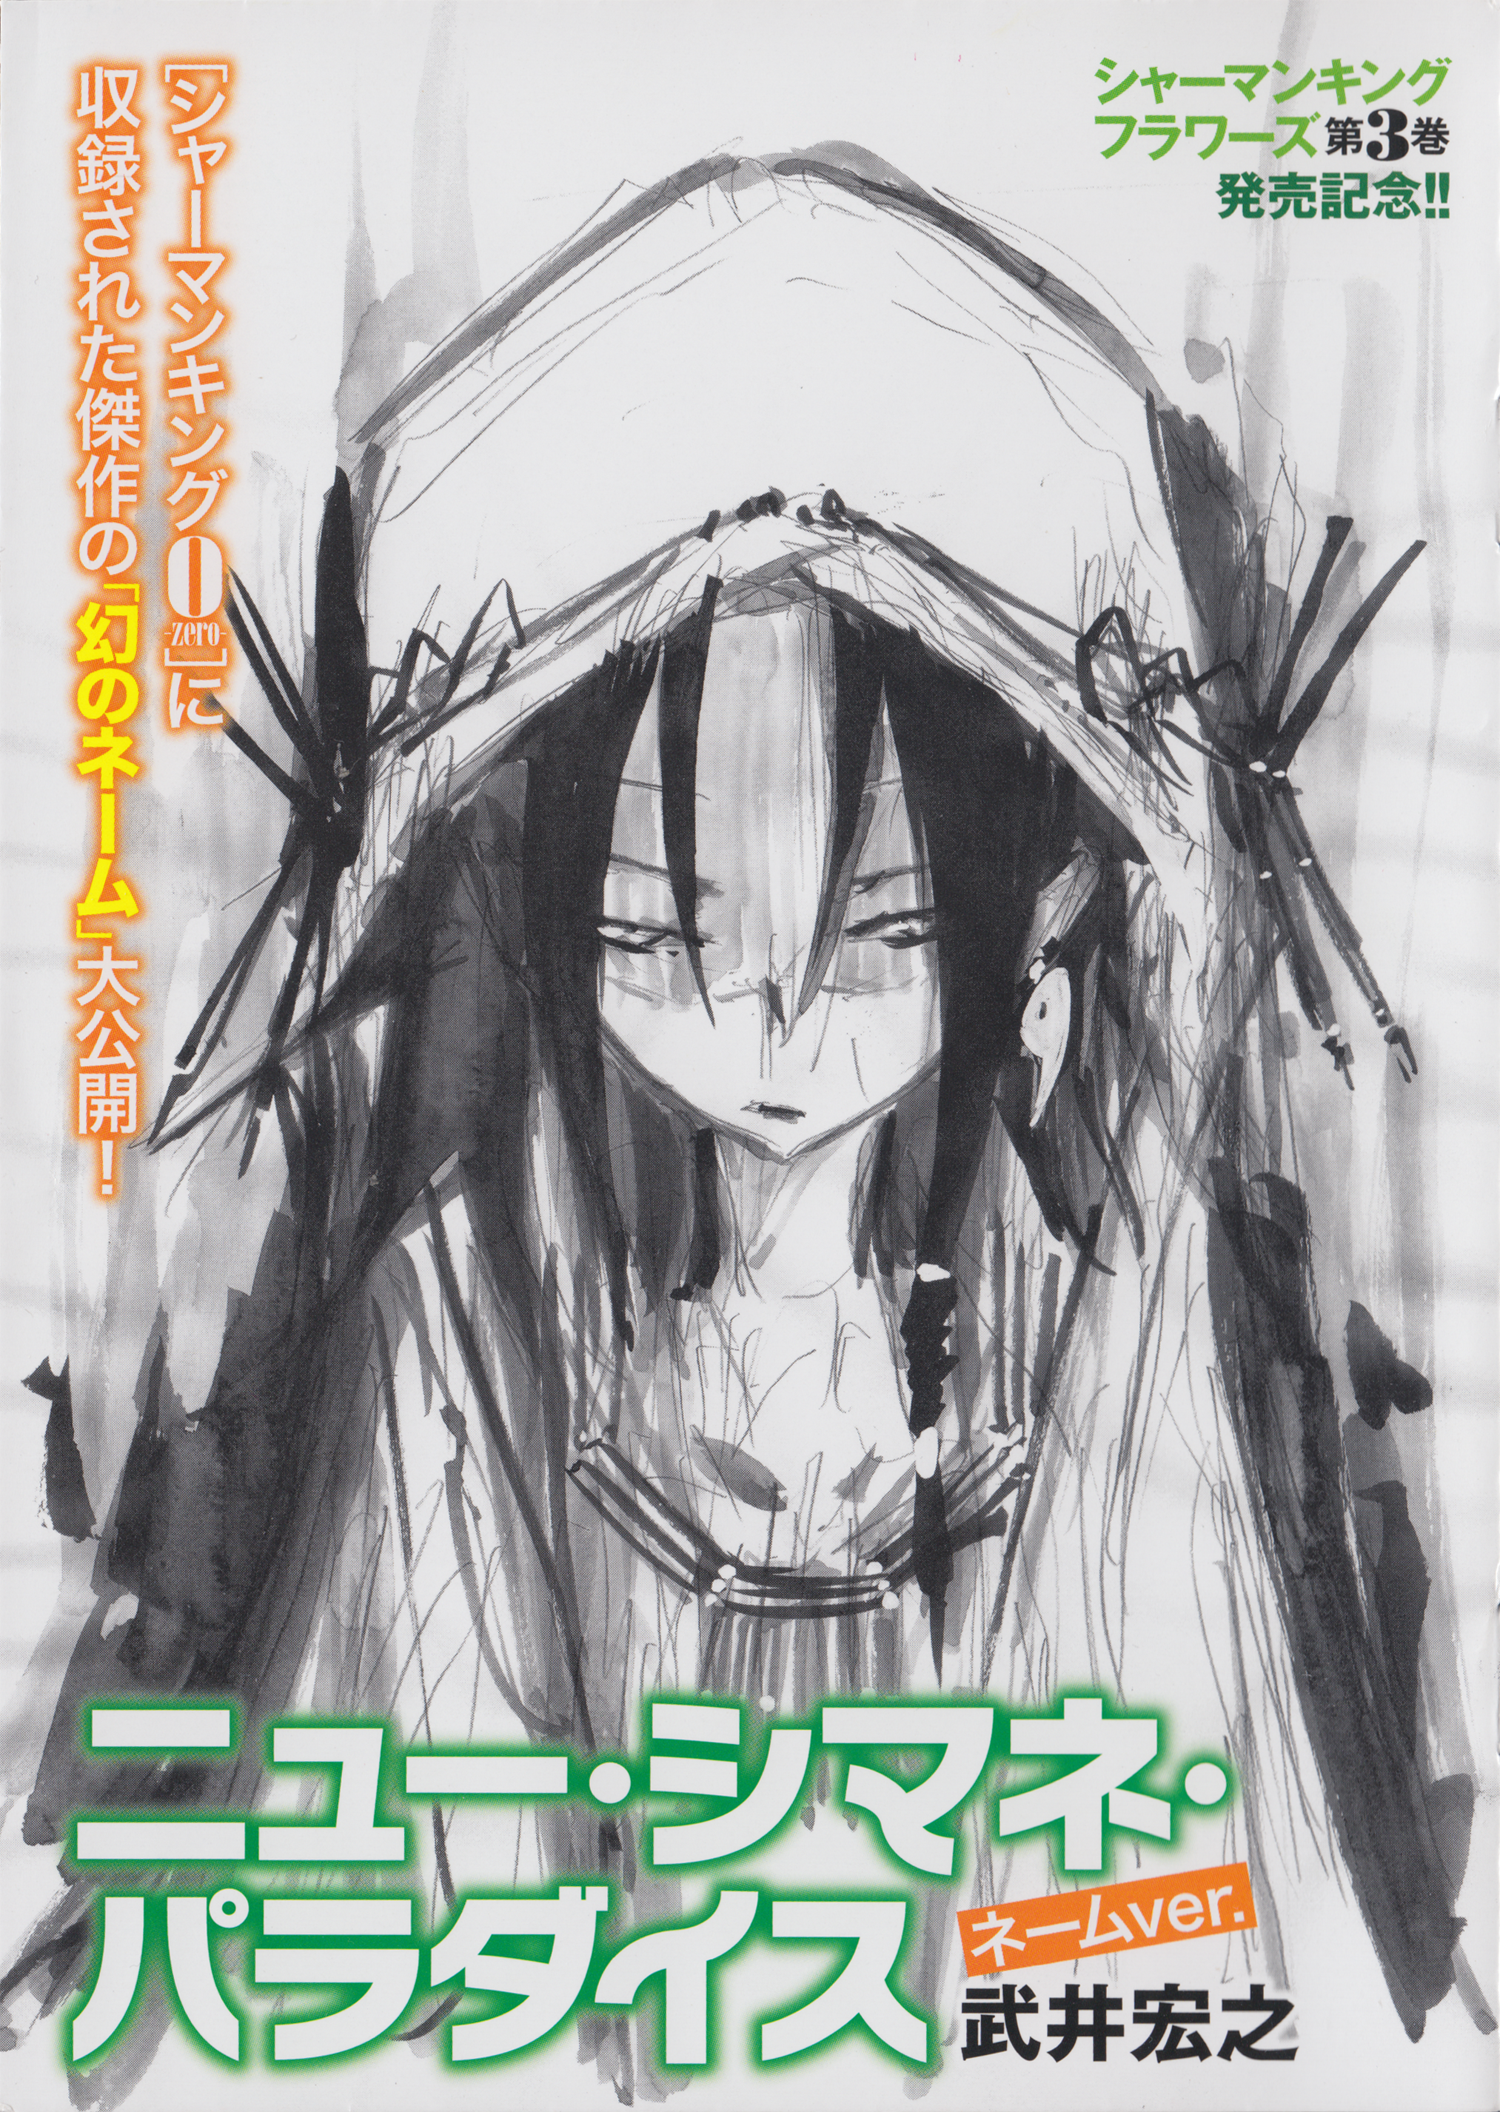 This Week In Shaman King June 14th Patch Cafe